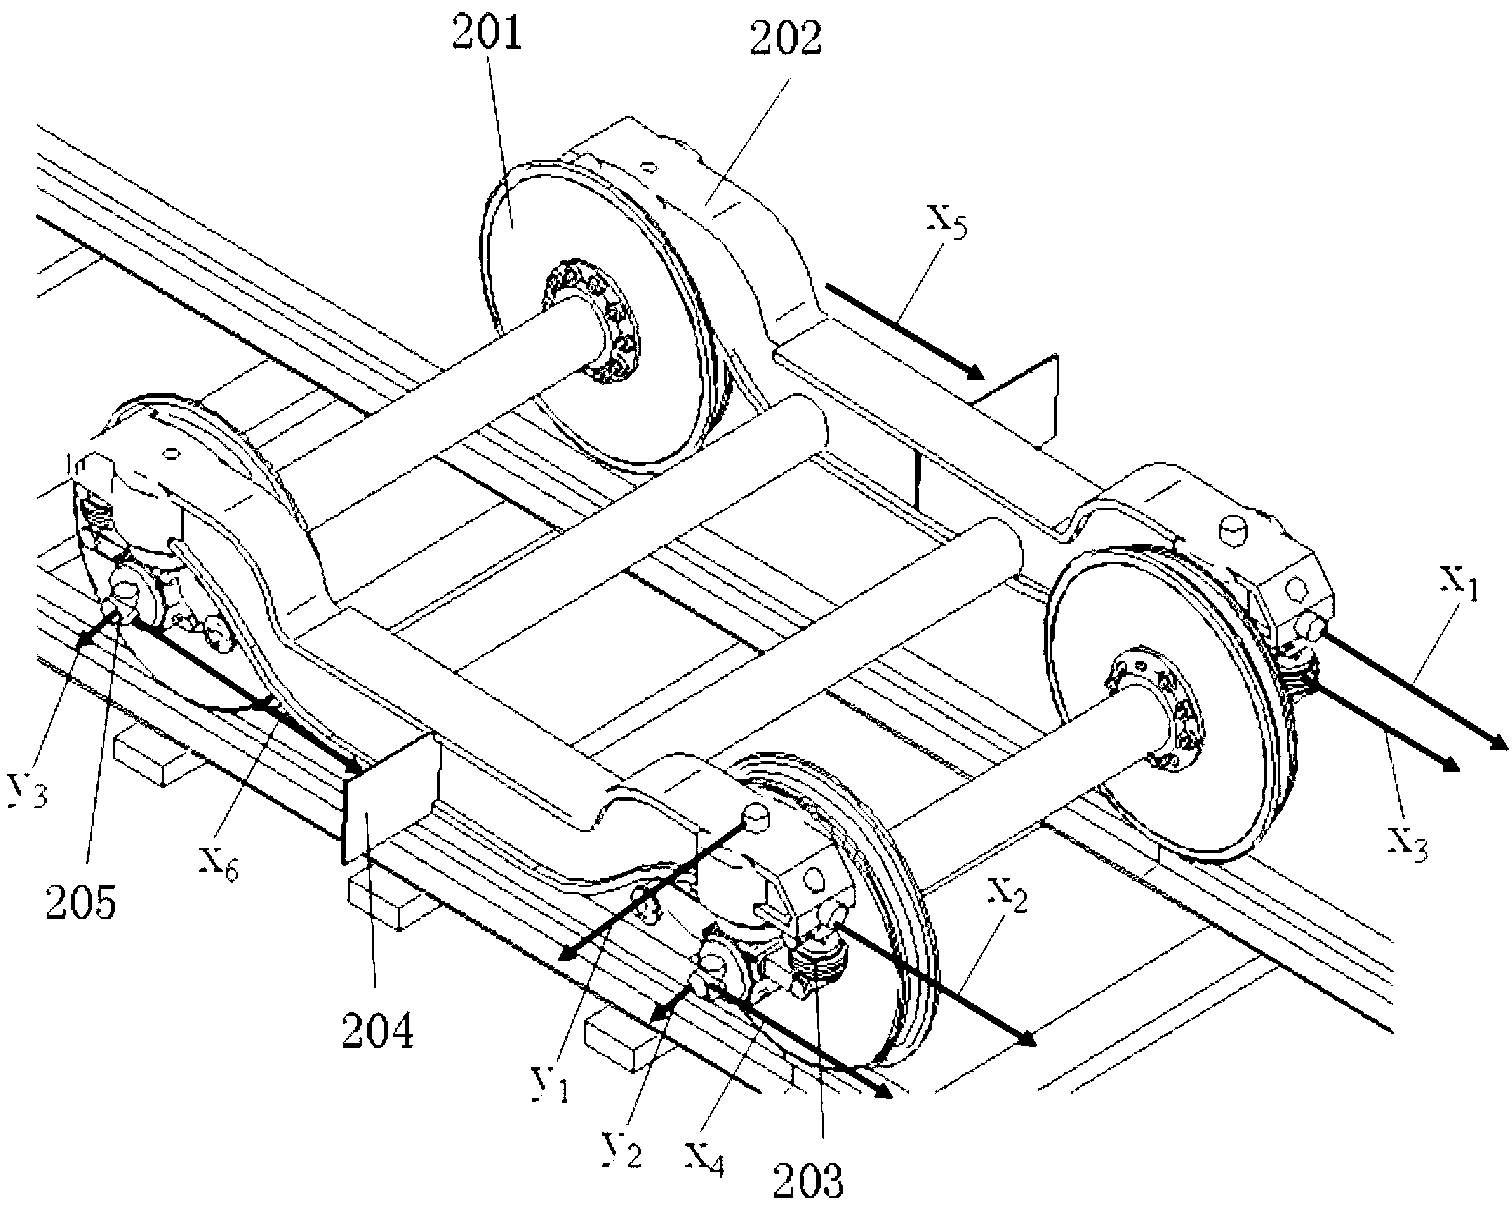 Snake movement experiment table for railway vehicle bogie